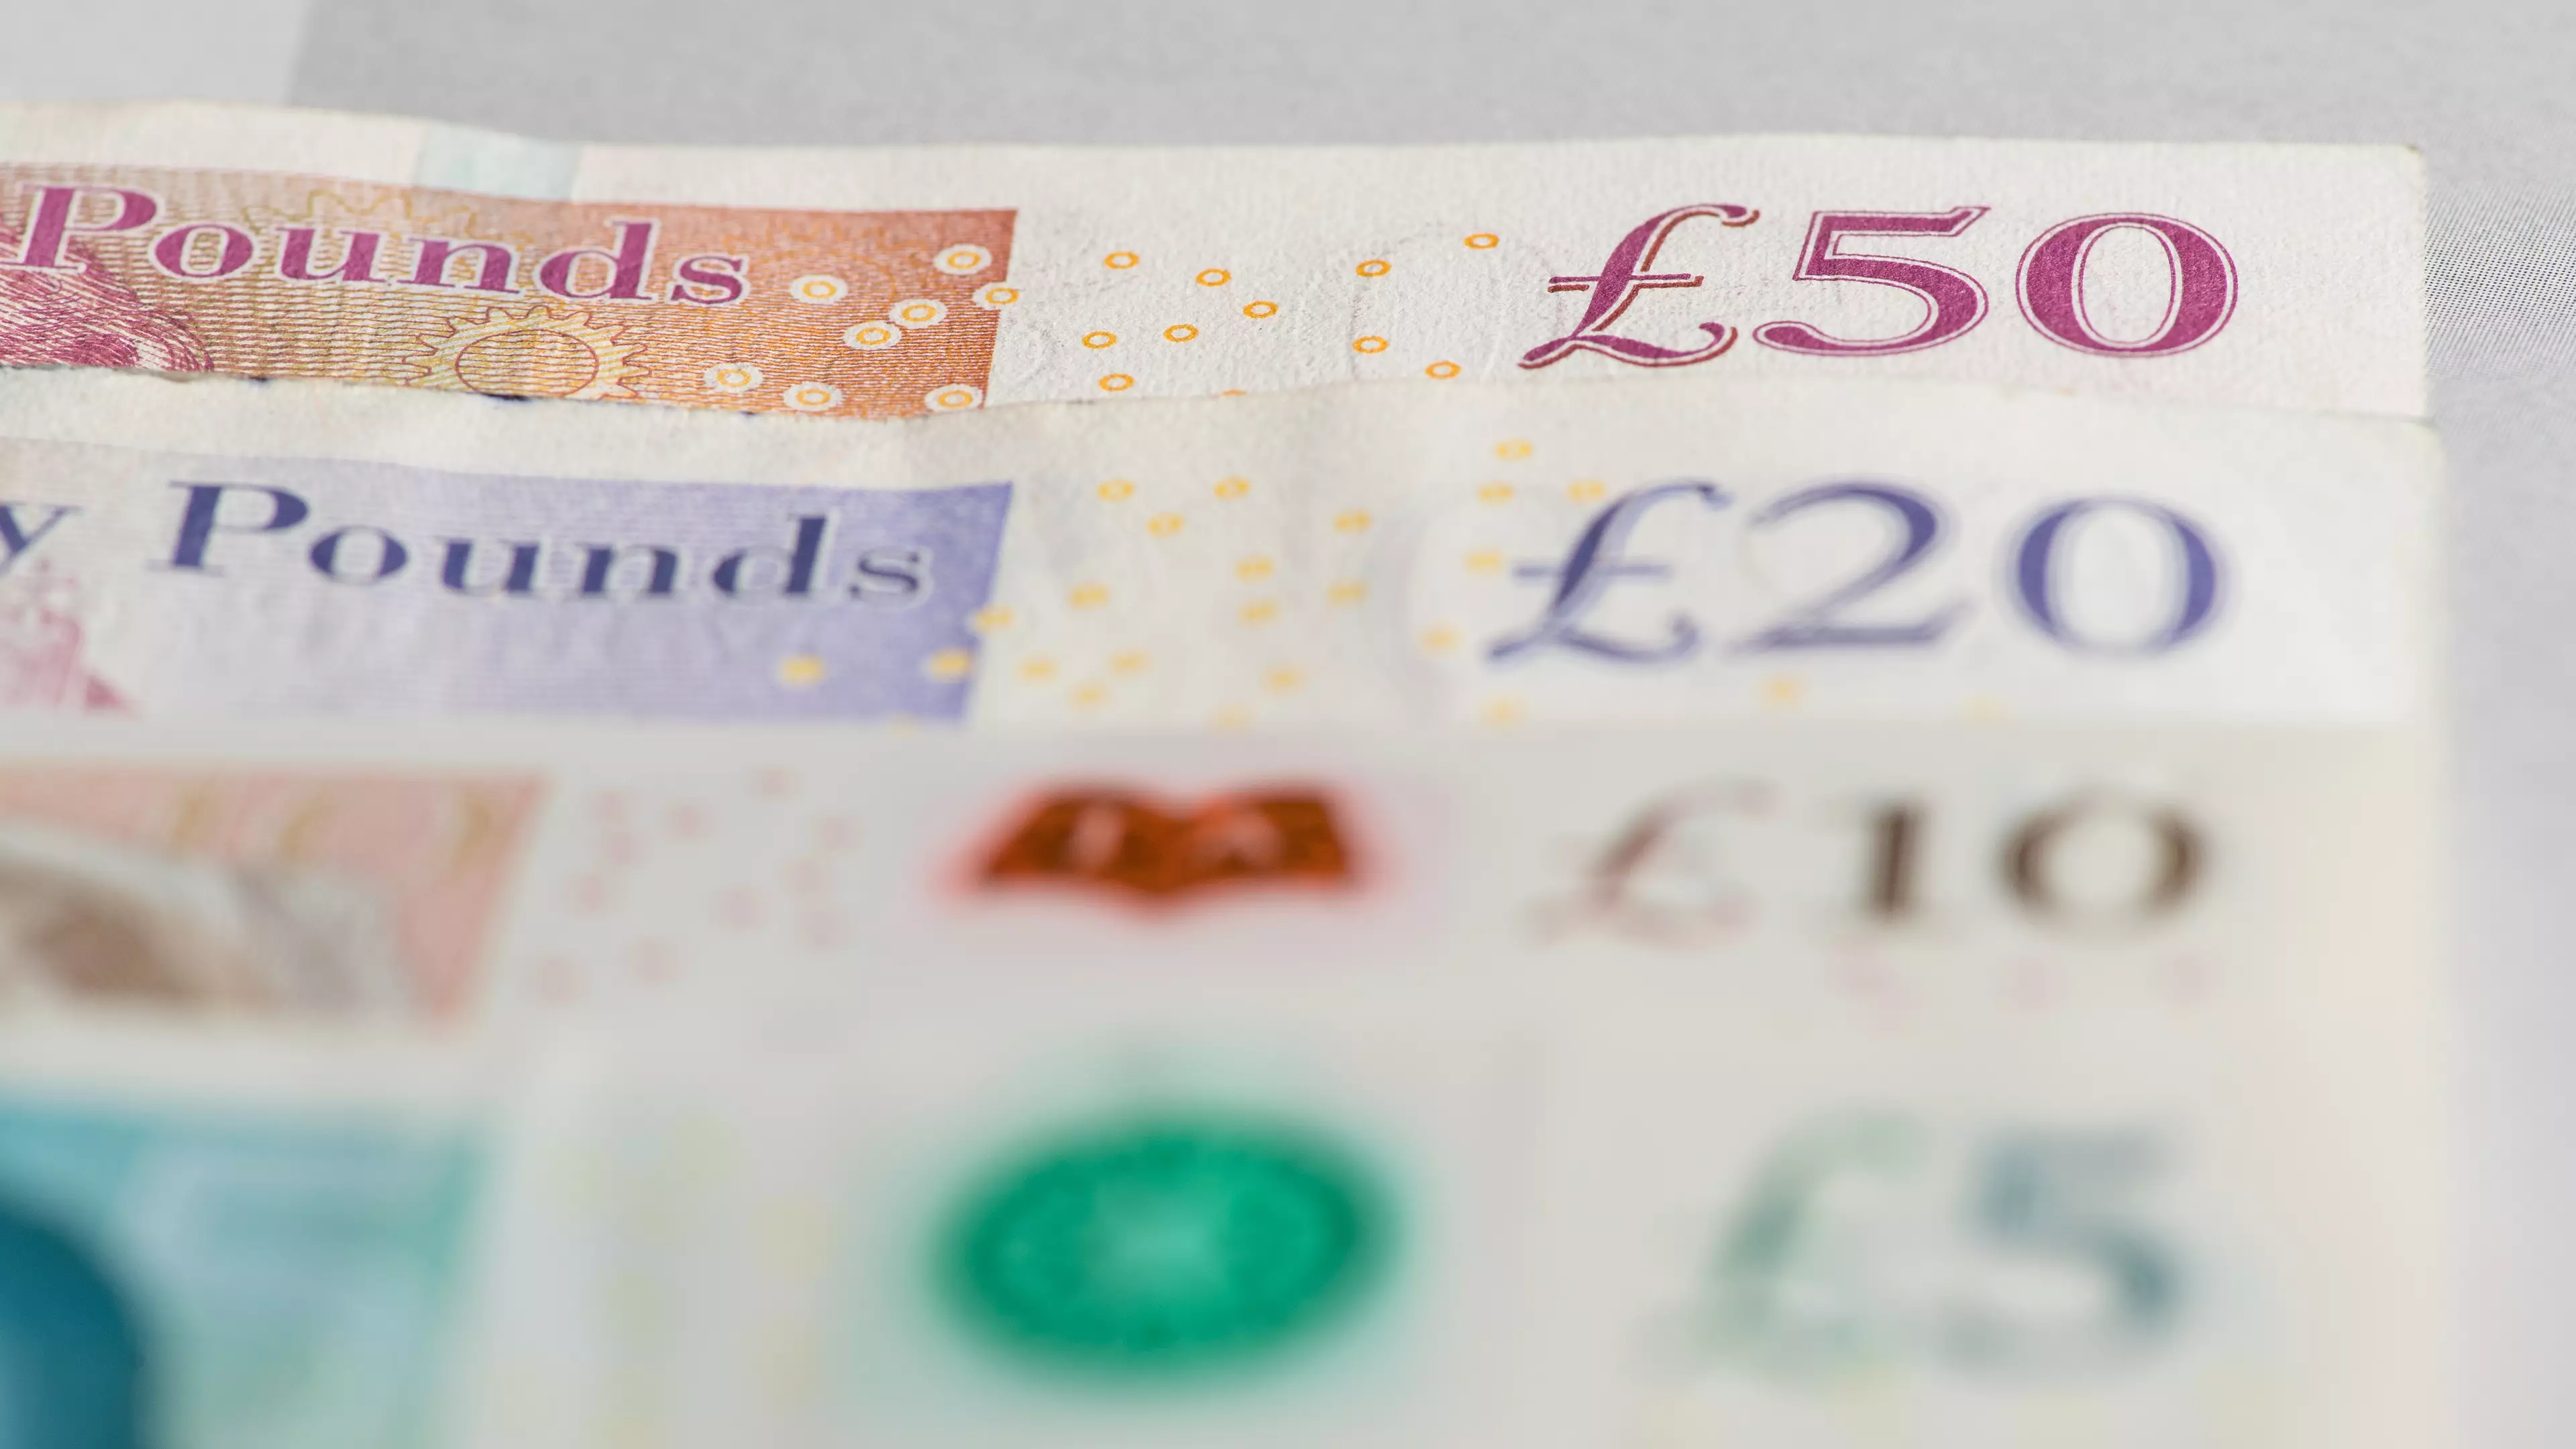 The New £50 Will Be Made With Animal Fat, Bank Of England Confirms